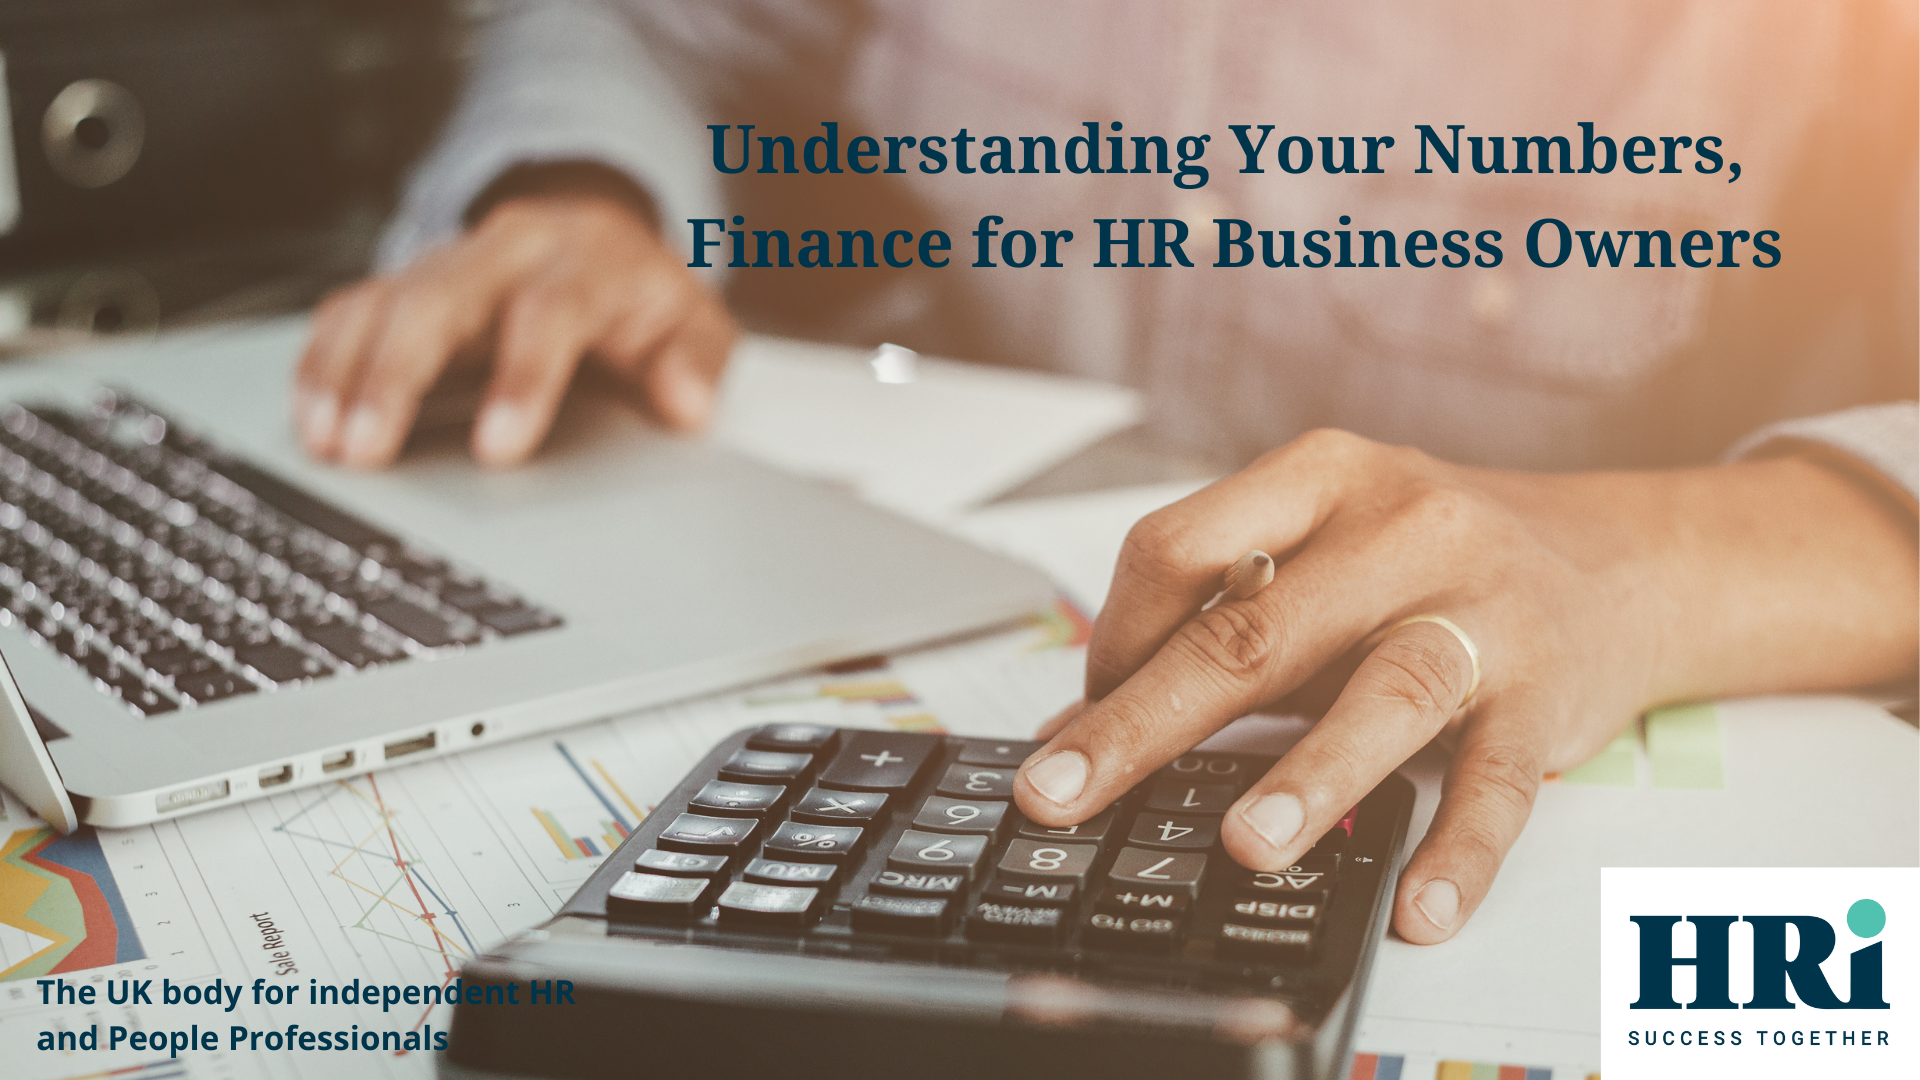 Finance for HR Business Owners | HRi